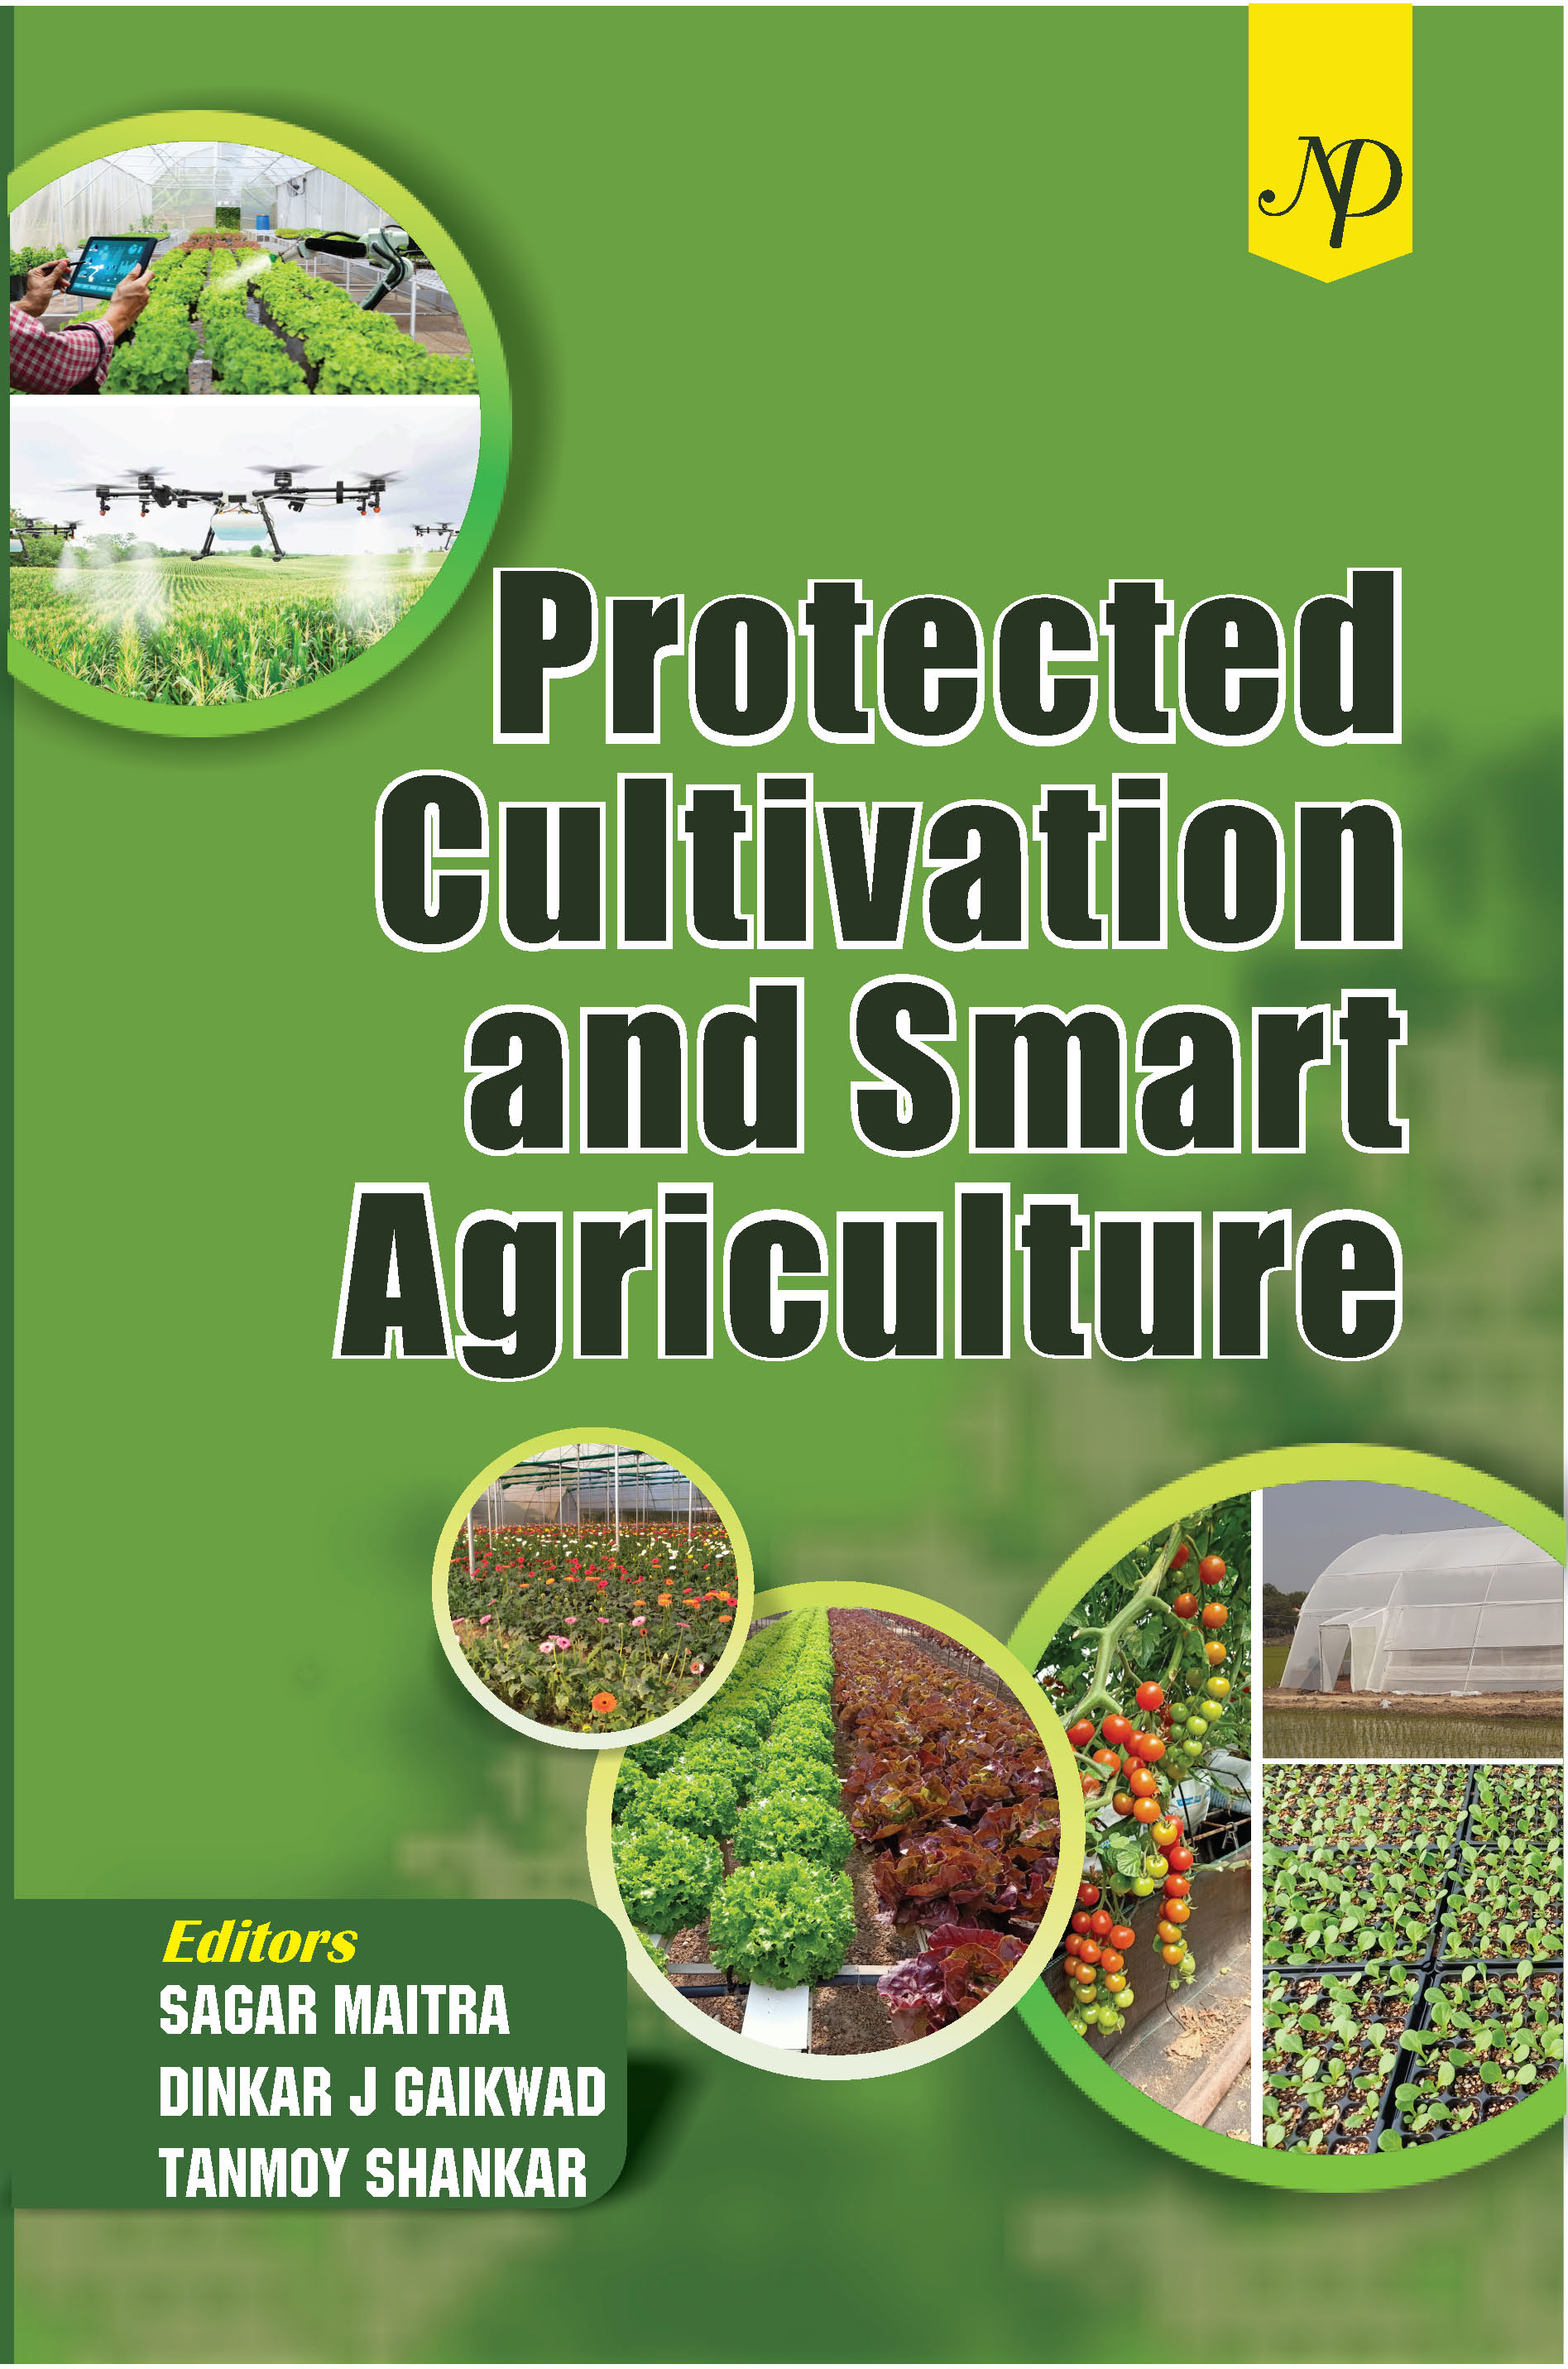 Protected Cultivation and Smart Agriculture Cover.jpg